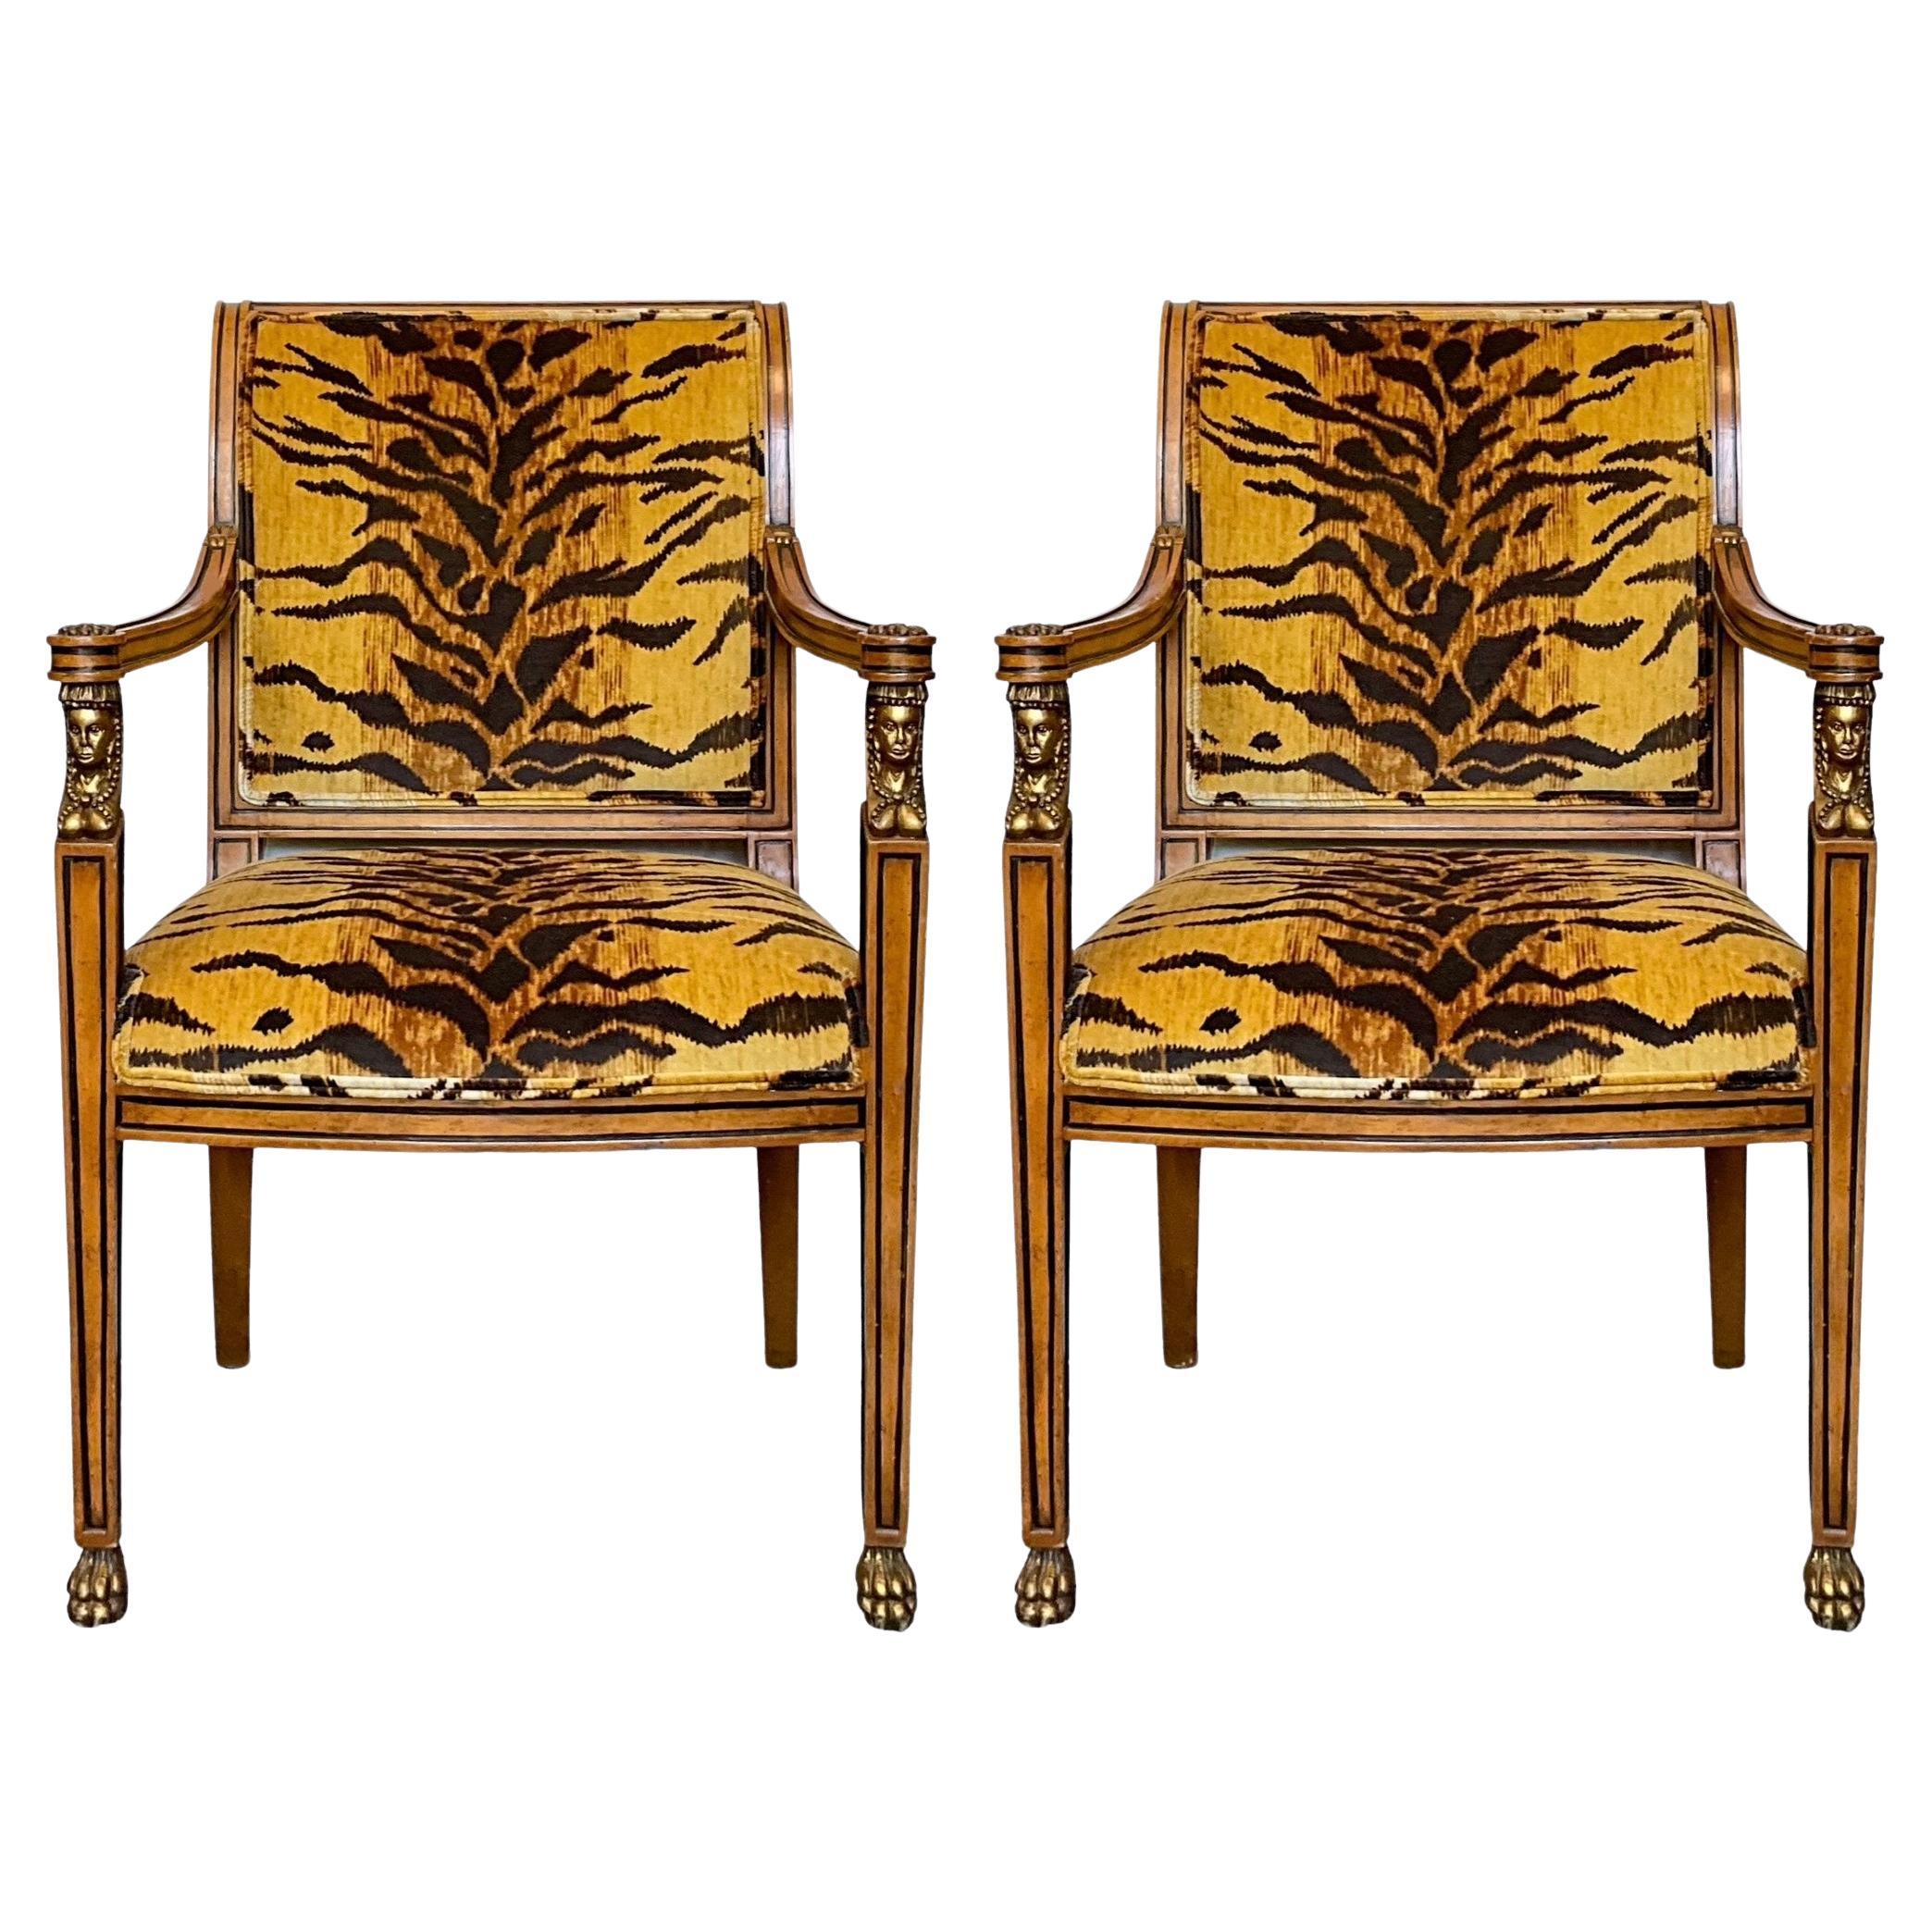 Early 20th-C. Egyptian Revival Style Bergere Chairs In Tiger Velvet - Pair